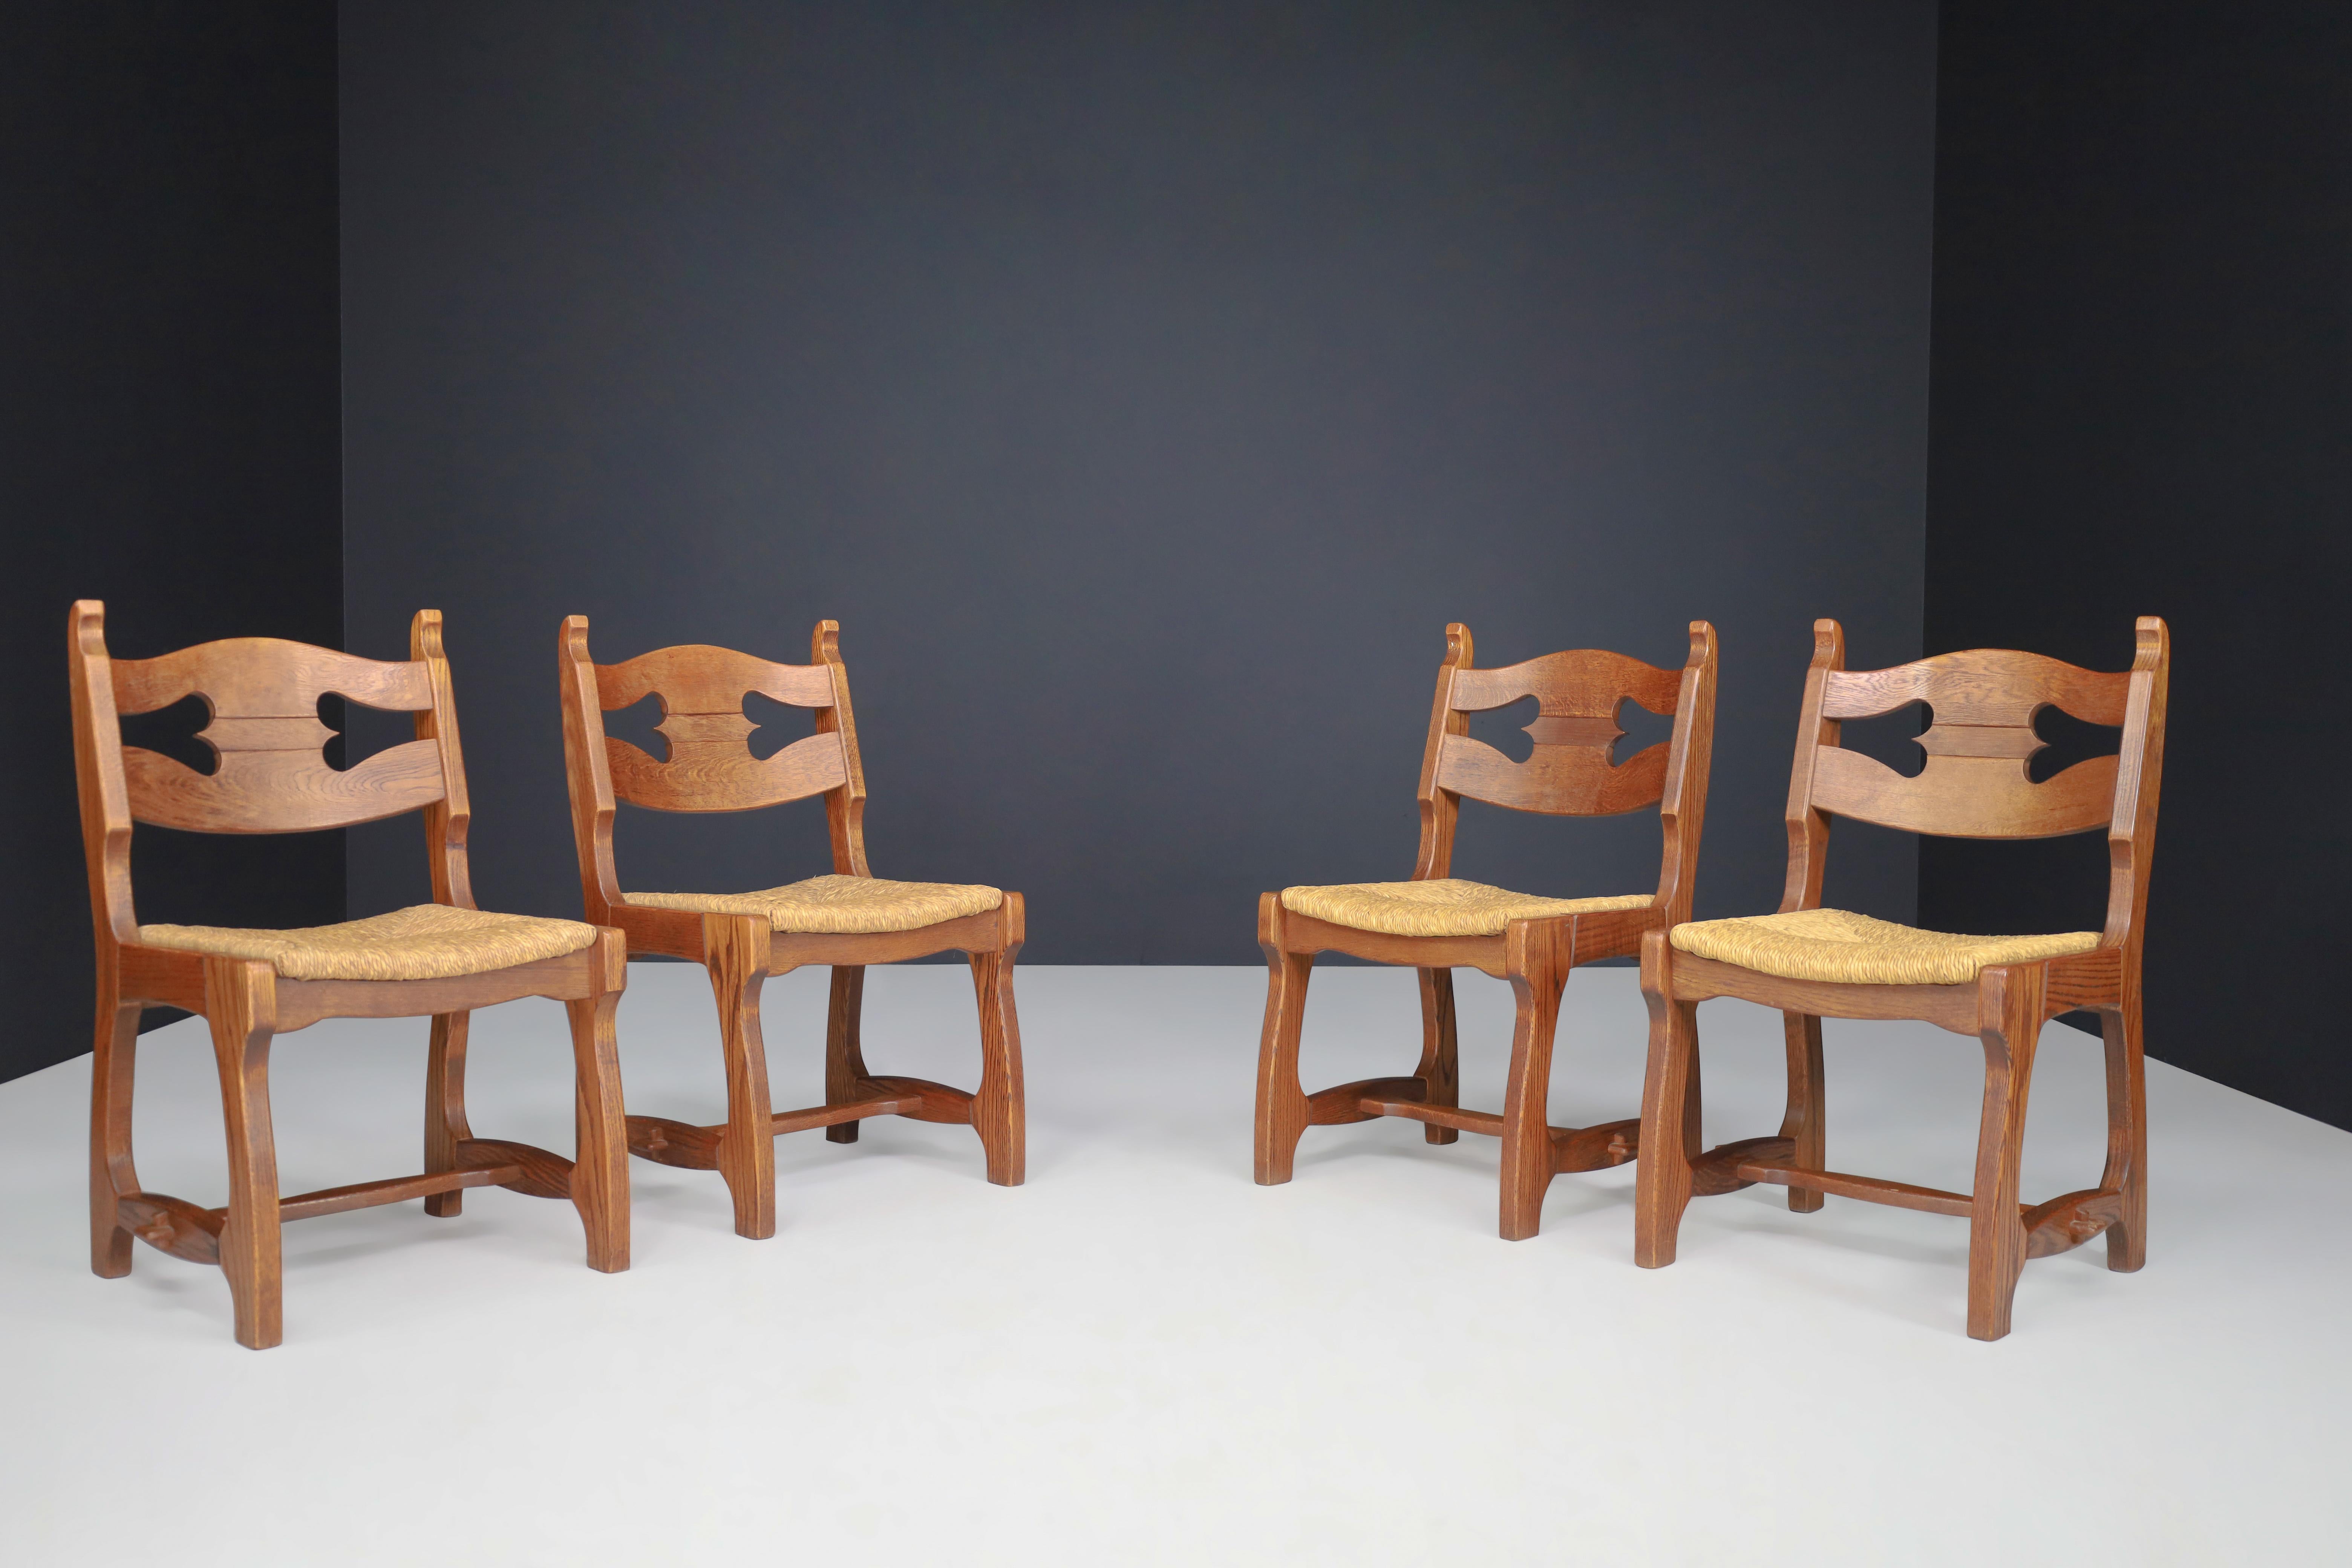 Sculptural oak and rush dining chairs, France, 1960s

Set of four sculptural oak and rush dining chairs, France, 1960s. These chairs are made entirely of wood and rush. They are in excellent original condition. The color of the wood is very warm